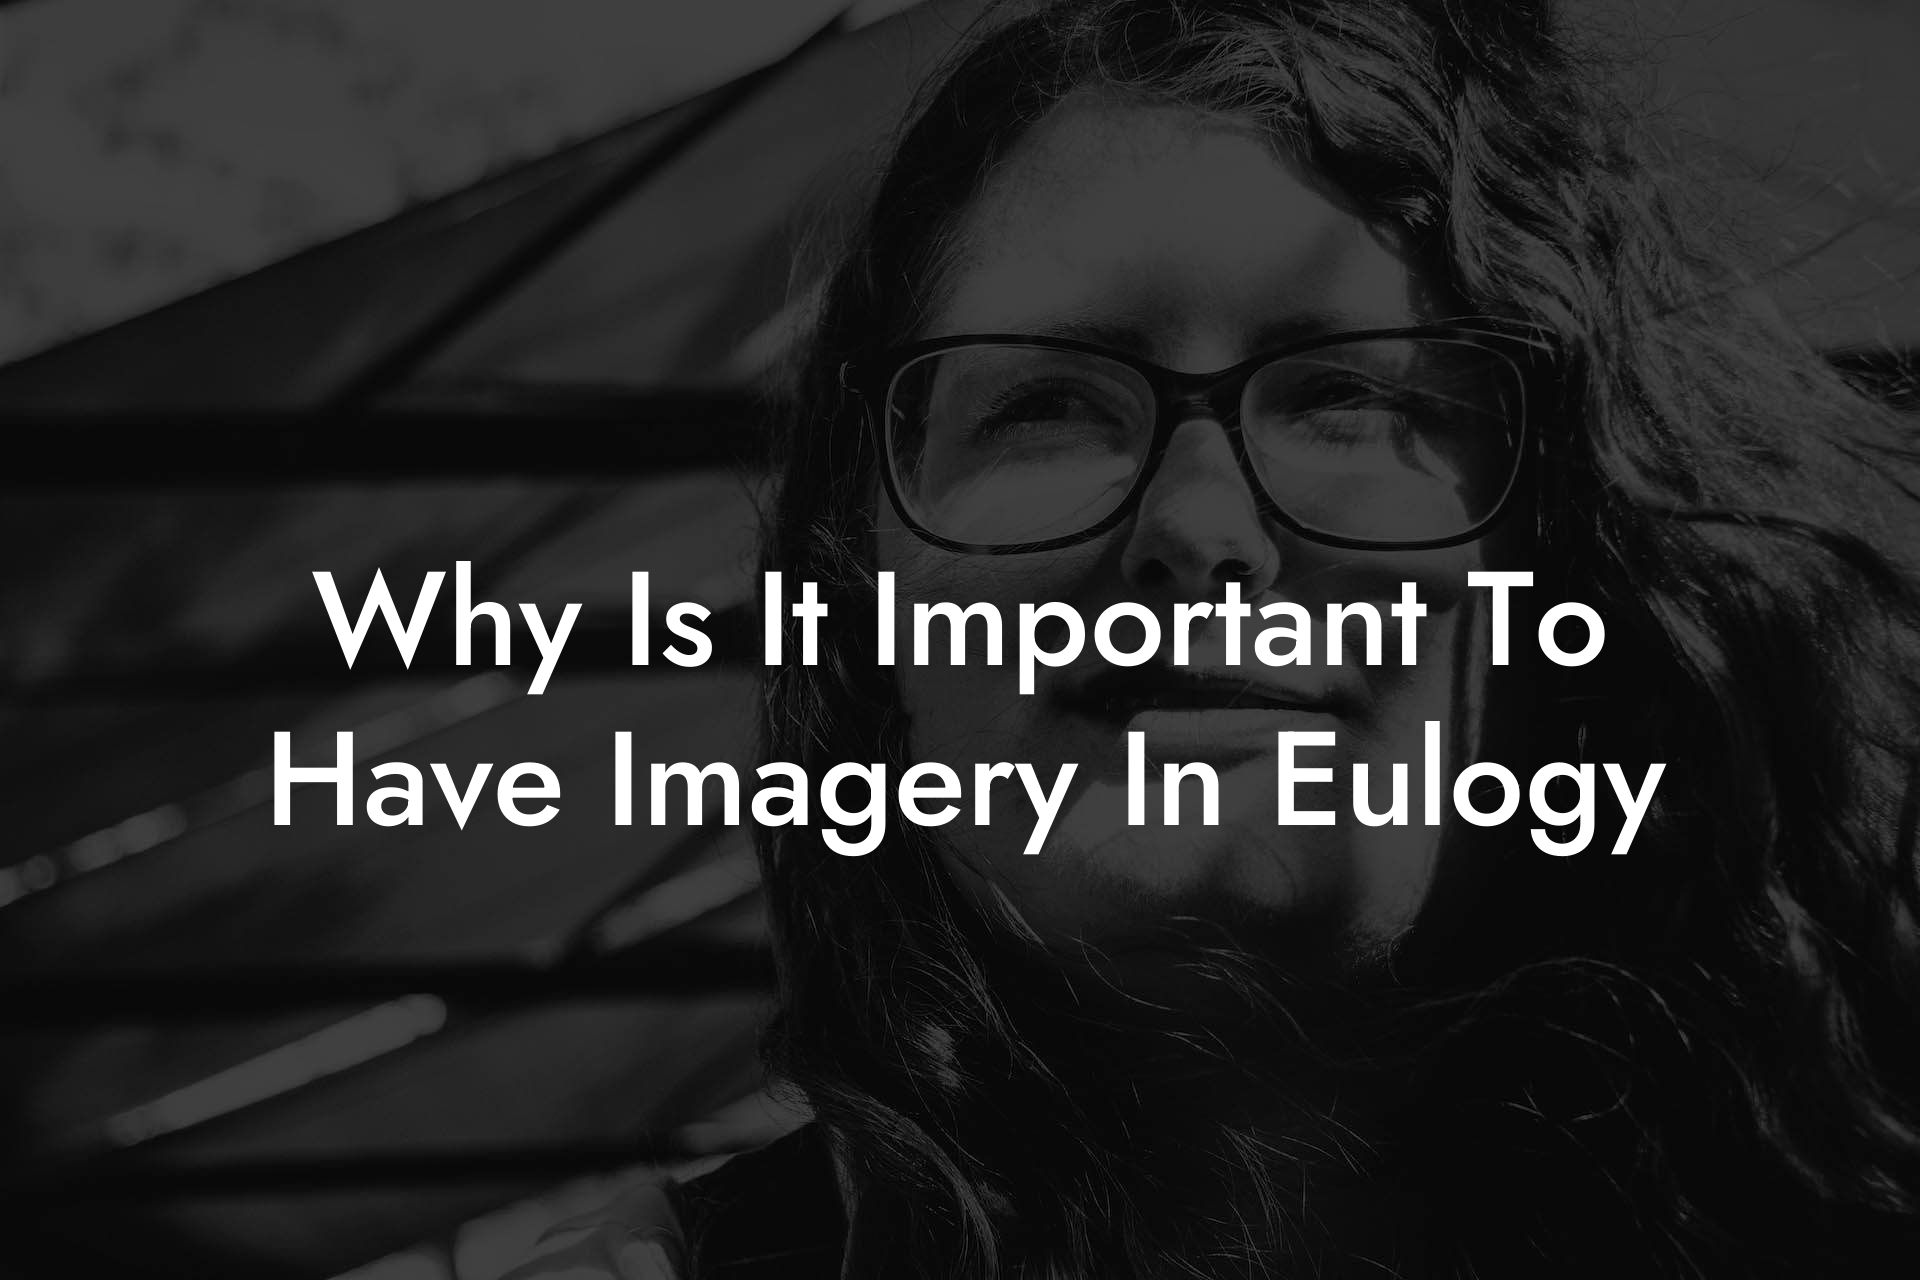 Why Is It Important To Have Imagery In Eulogy